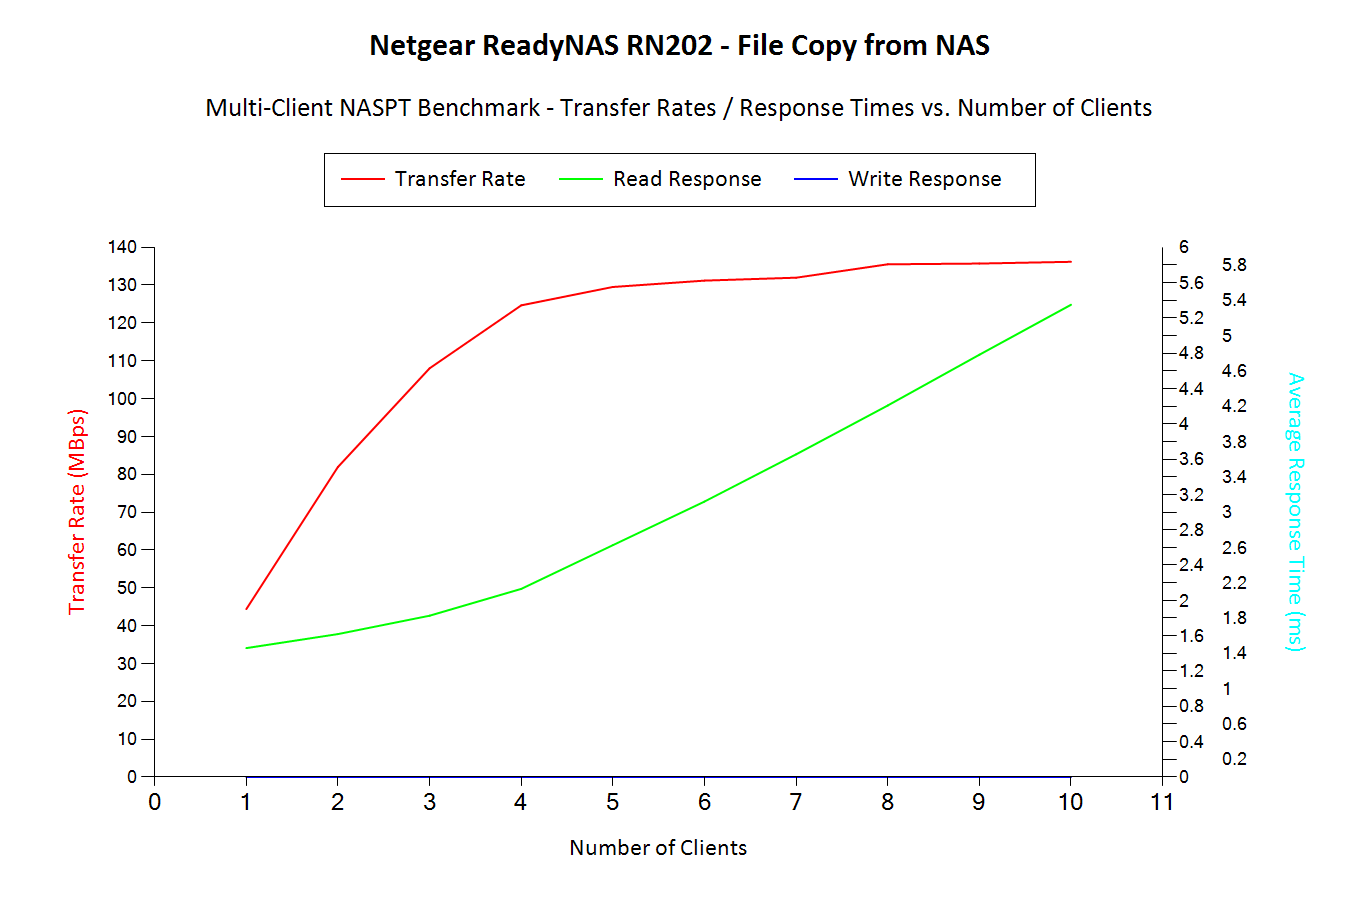 File Copy from NAS - Multi-Client Benchmark